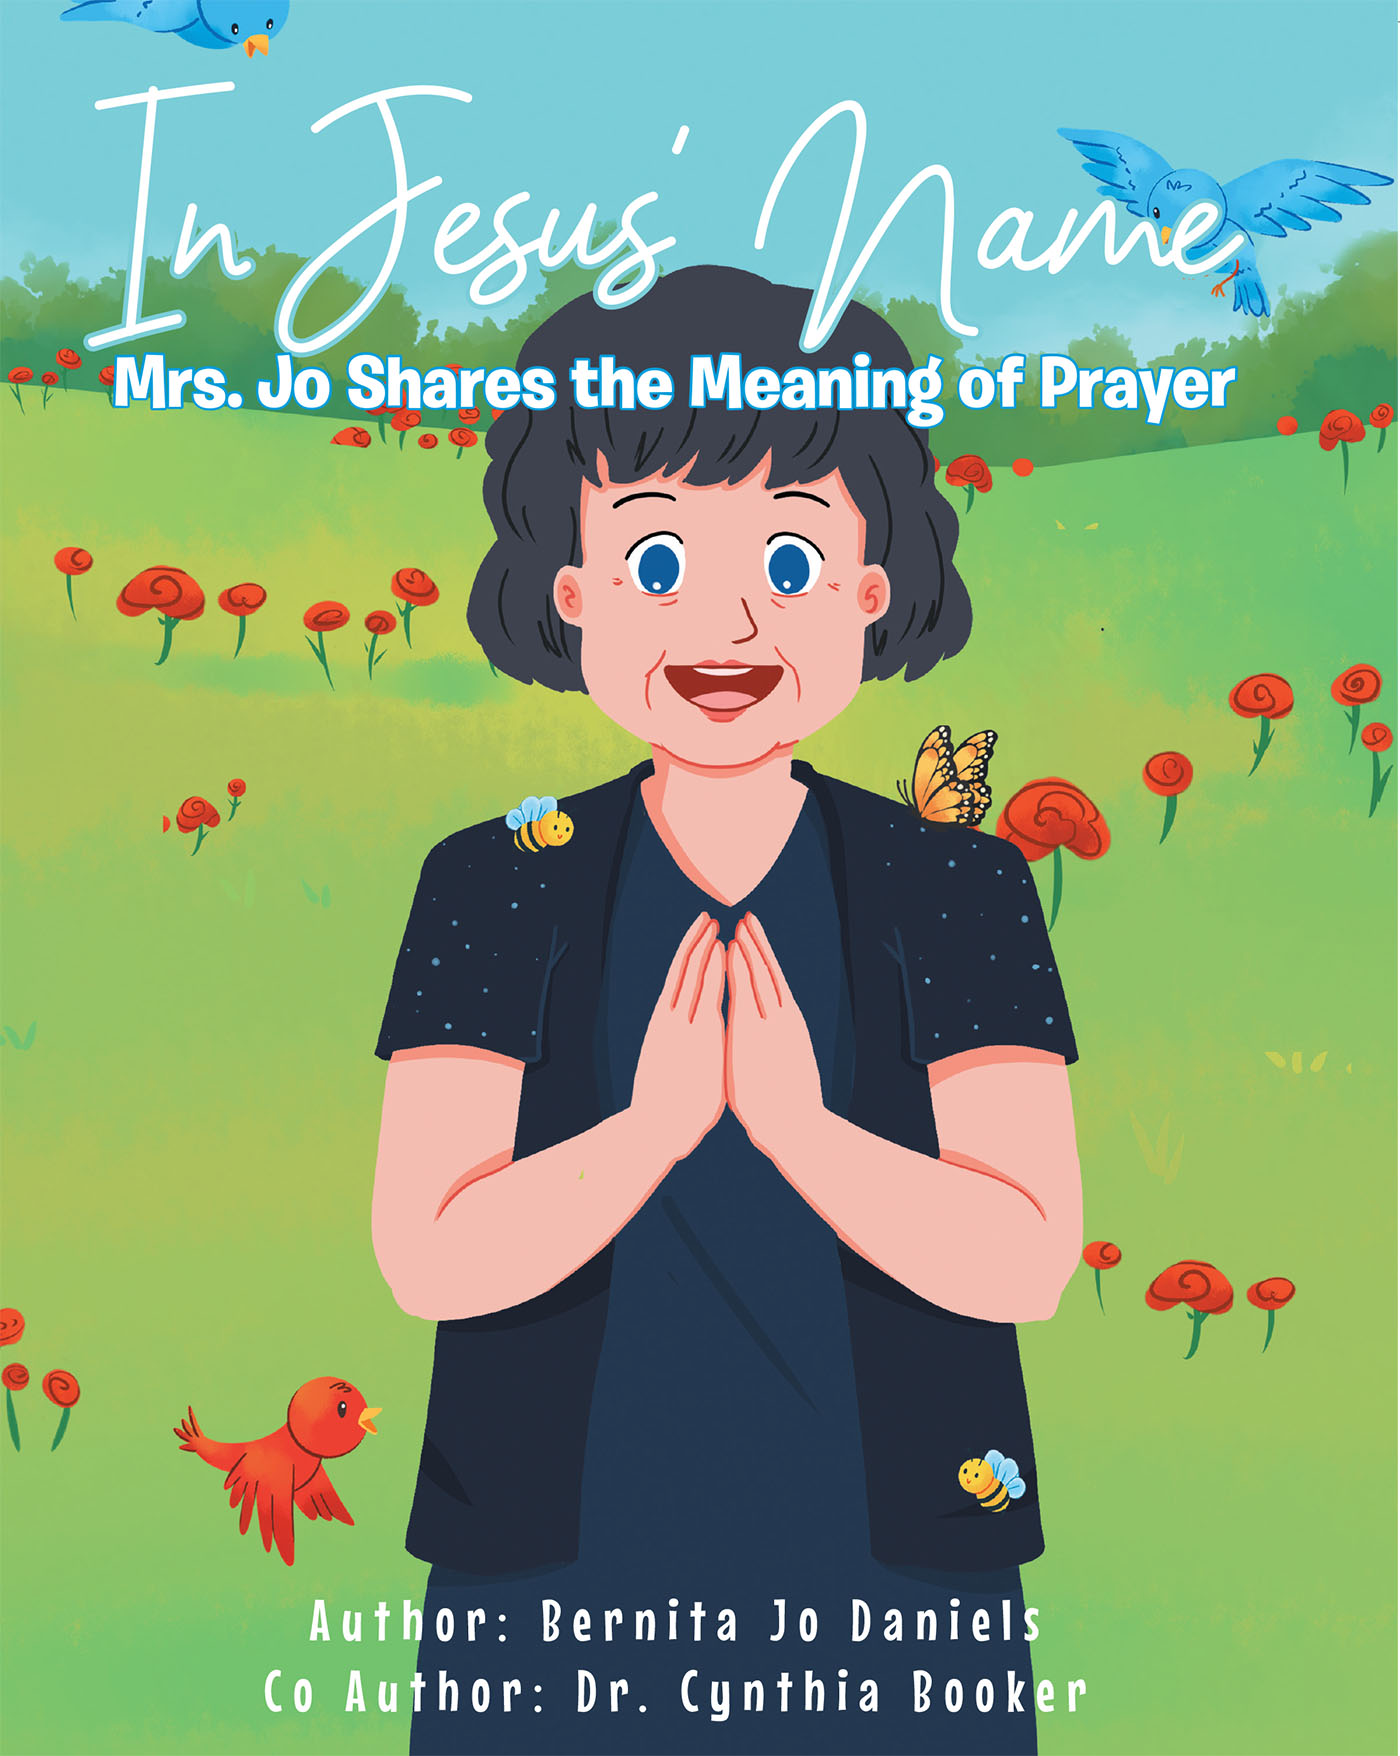 Bernita Jo Daniels and Dr. Cynthia Booker’s Newly Released “In Jesus’ Name: Mrs. Jo Shares the Meaning of Prayer” is an Inspiring Message of the Power of Prayer